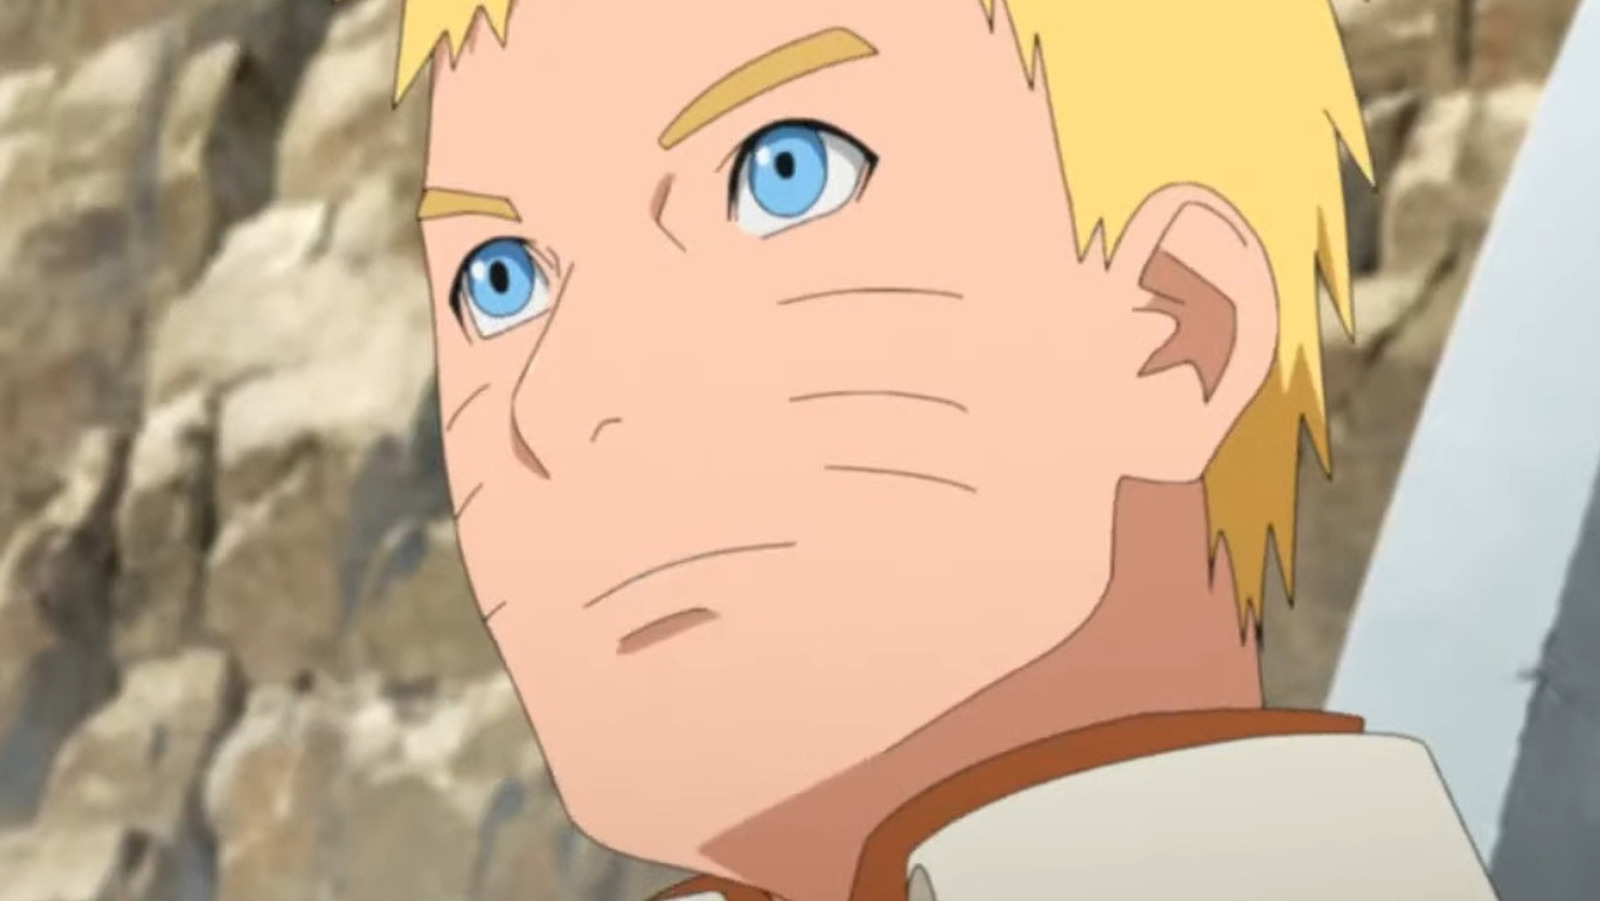 Boruto Gives Curious Update on Naruto's Sage Mode